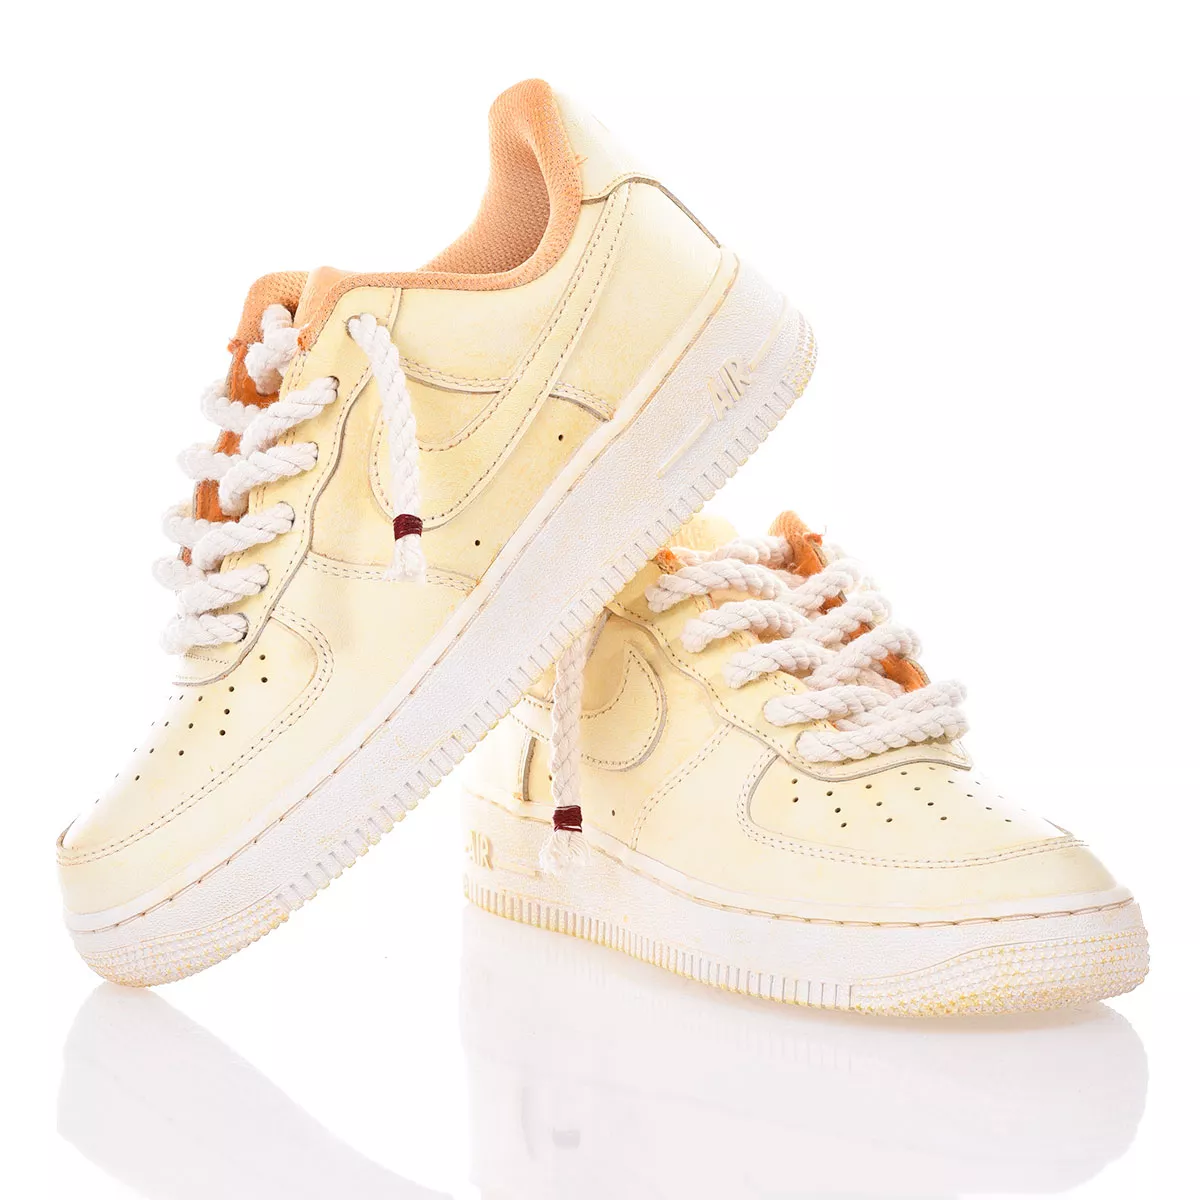 Nike Air Force 1 Dye Apricot Air Force 1 Used-Waschung